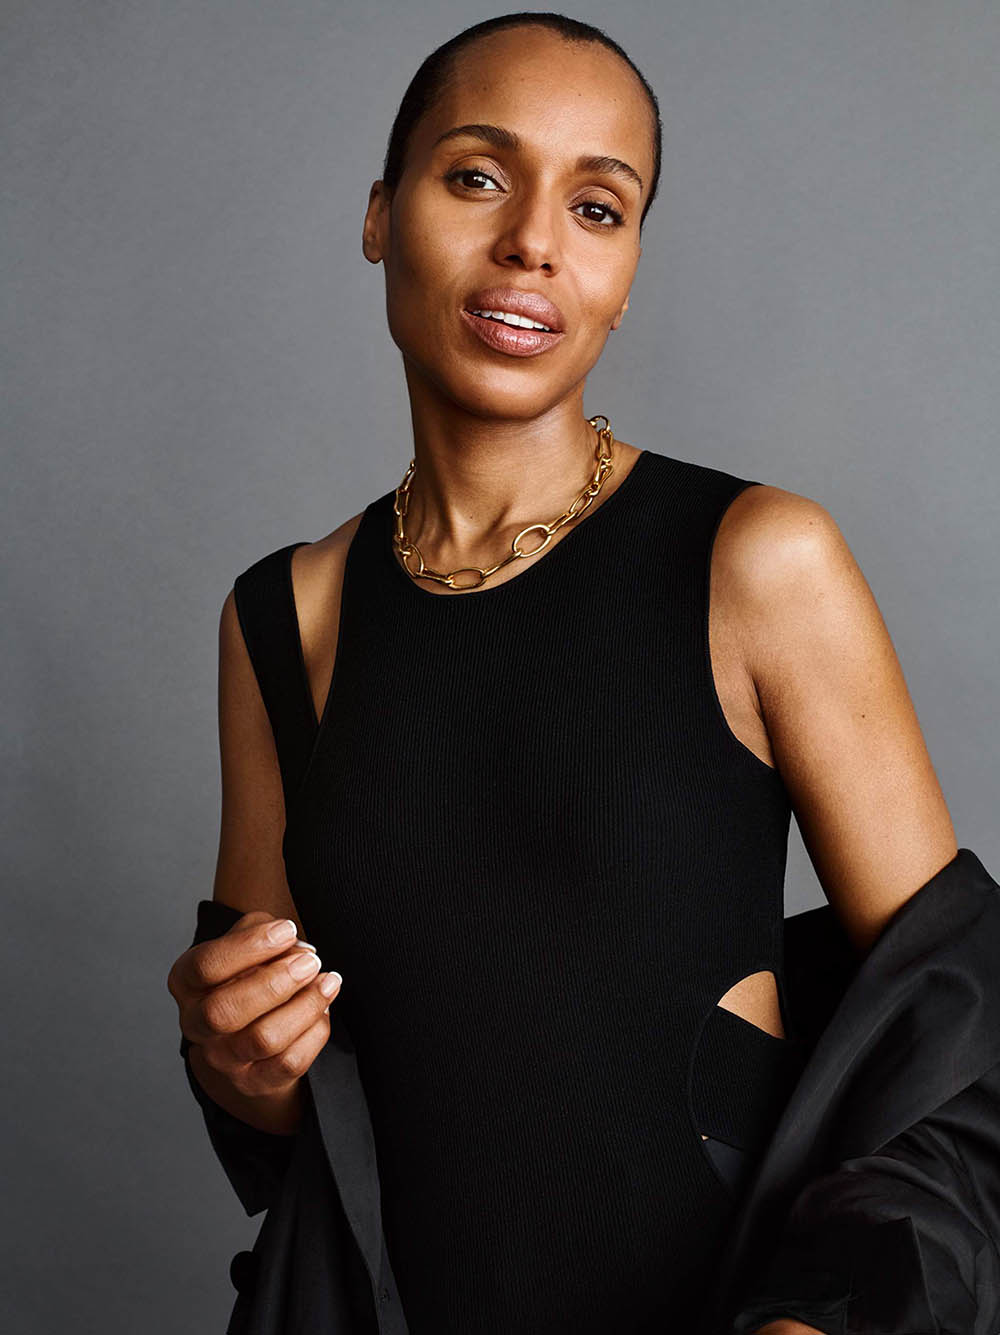 Kerry Washington covers Porter Magazine March 2nd, 2020 by Liz Collins